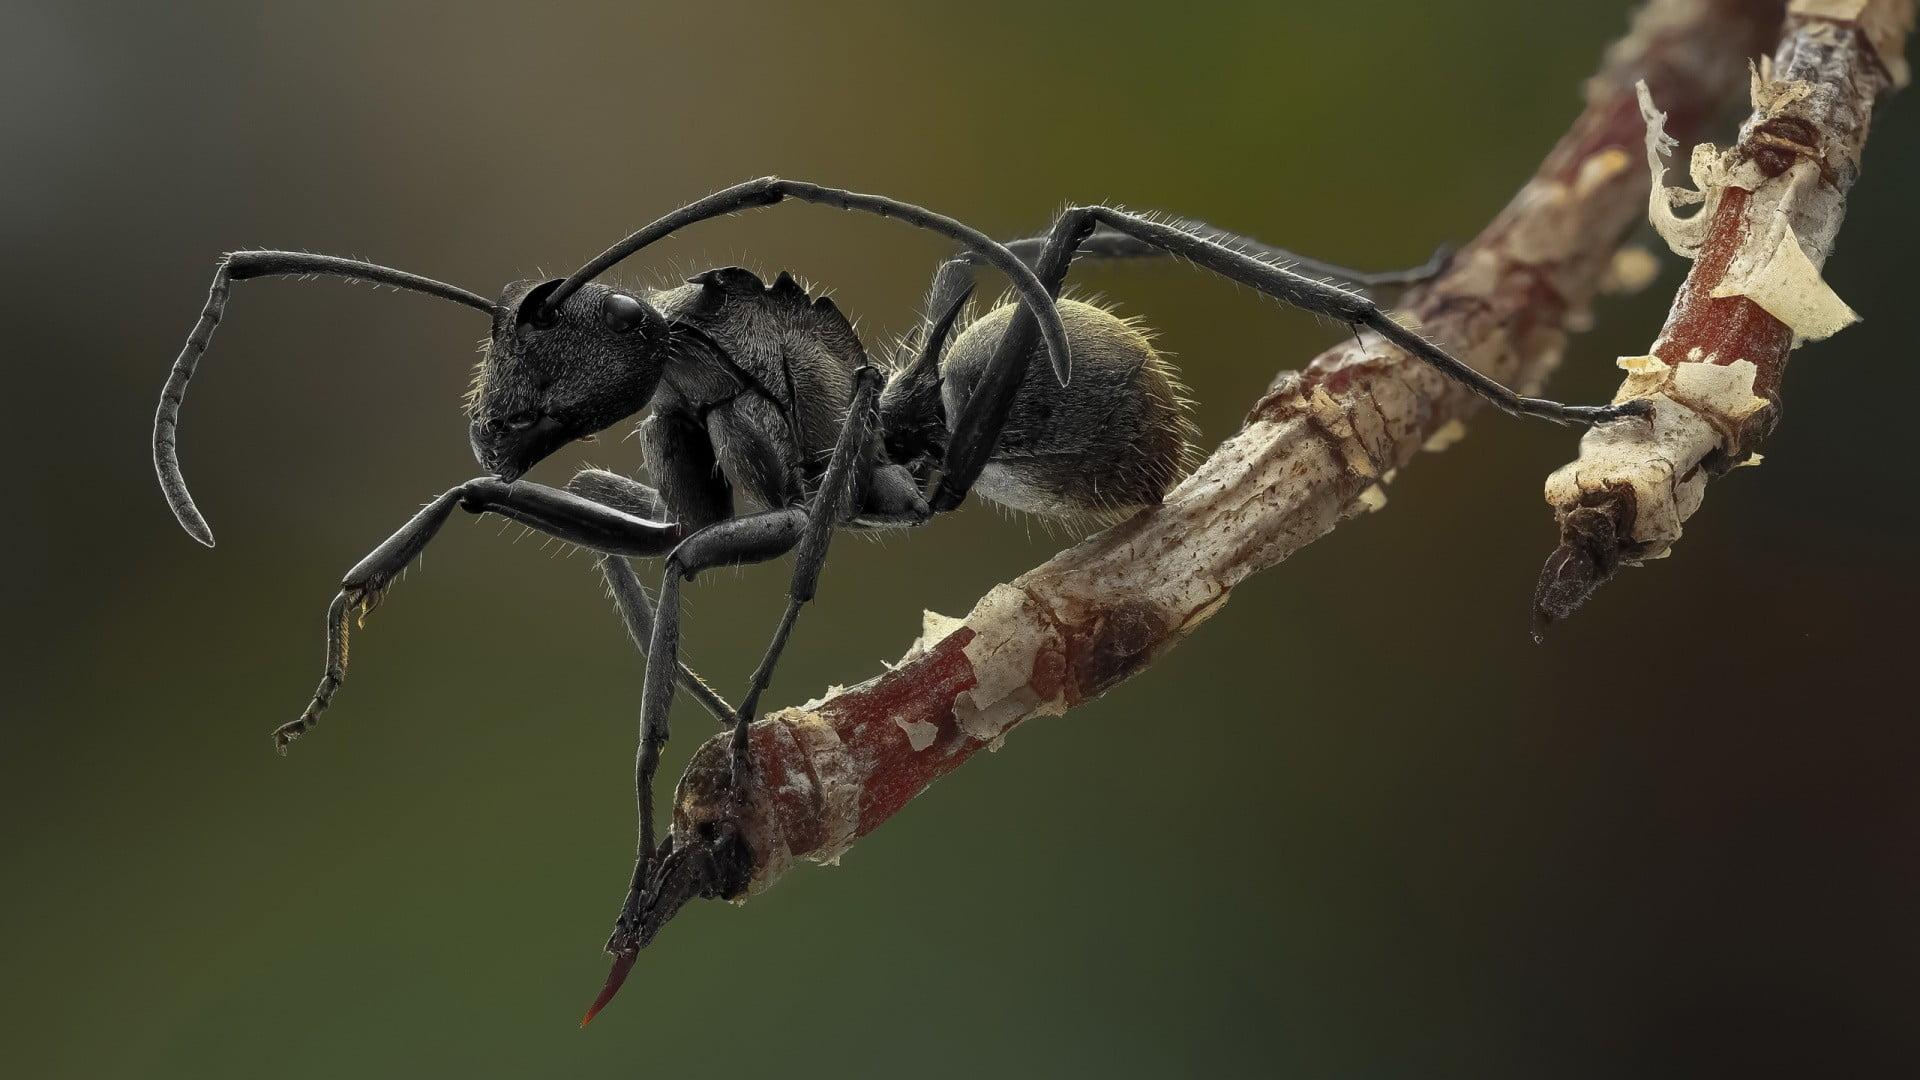 Black carpenter ant perching on brown tree branch during